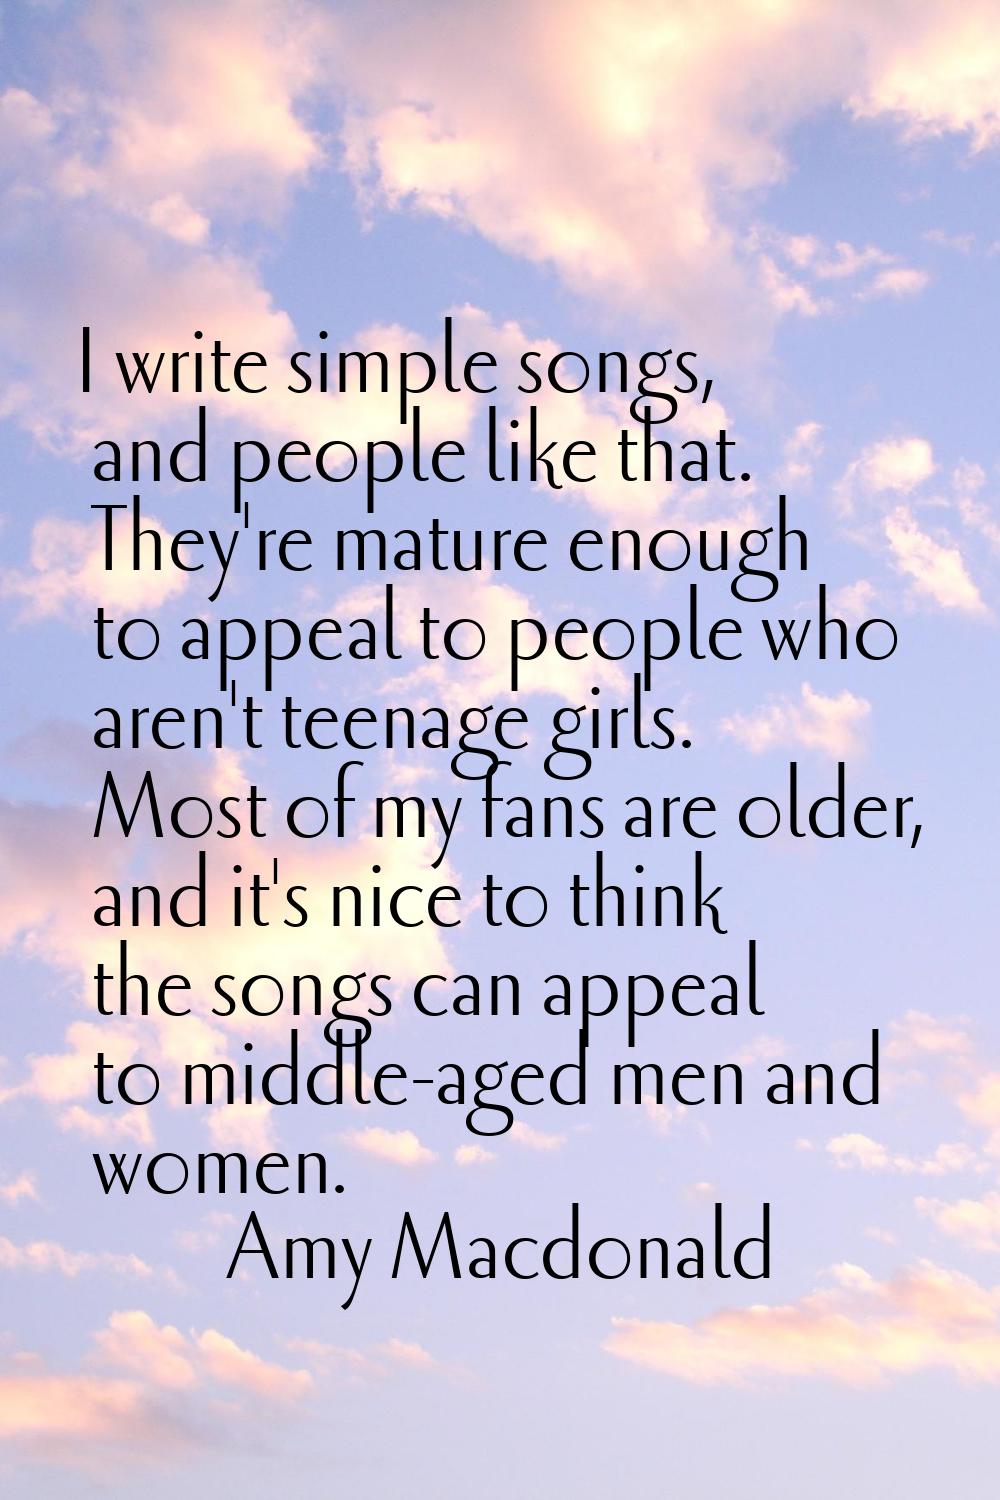 I write simple songs, and people like that. They're mature enough to appeal to people who aren't te